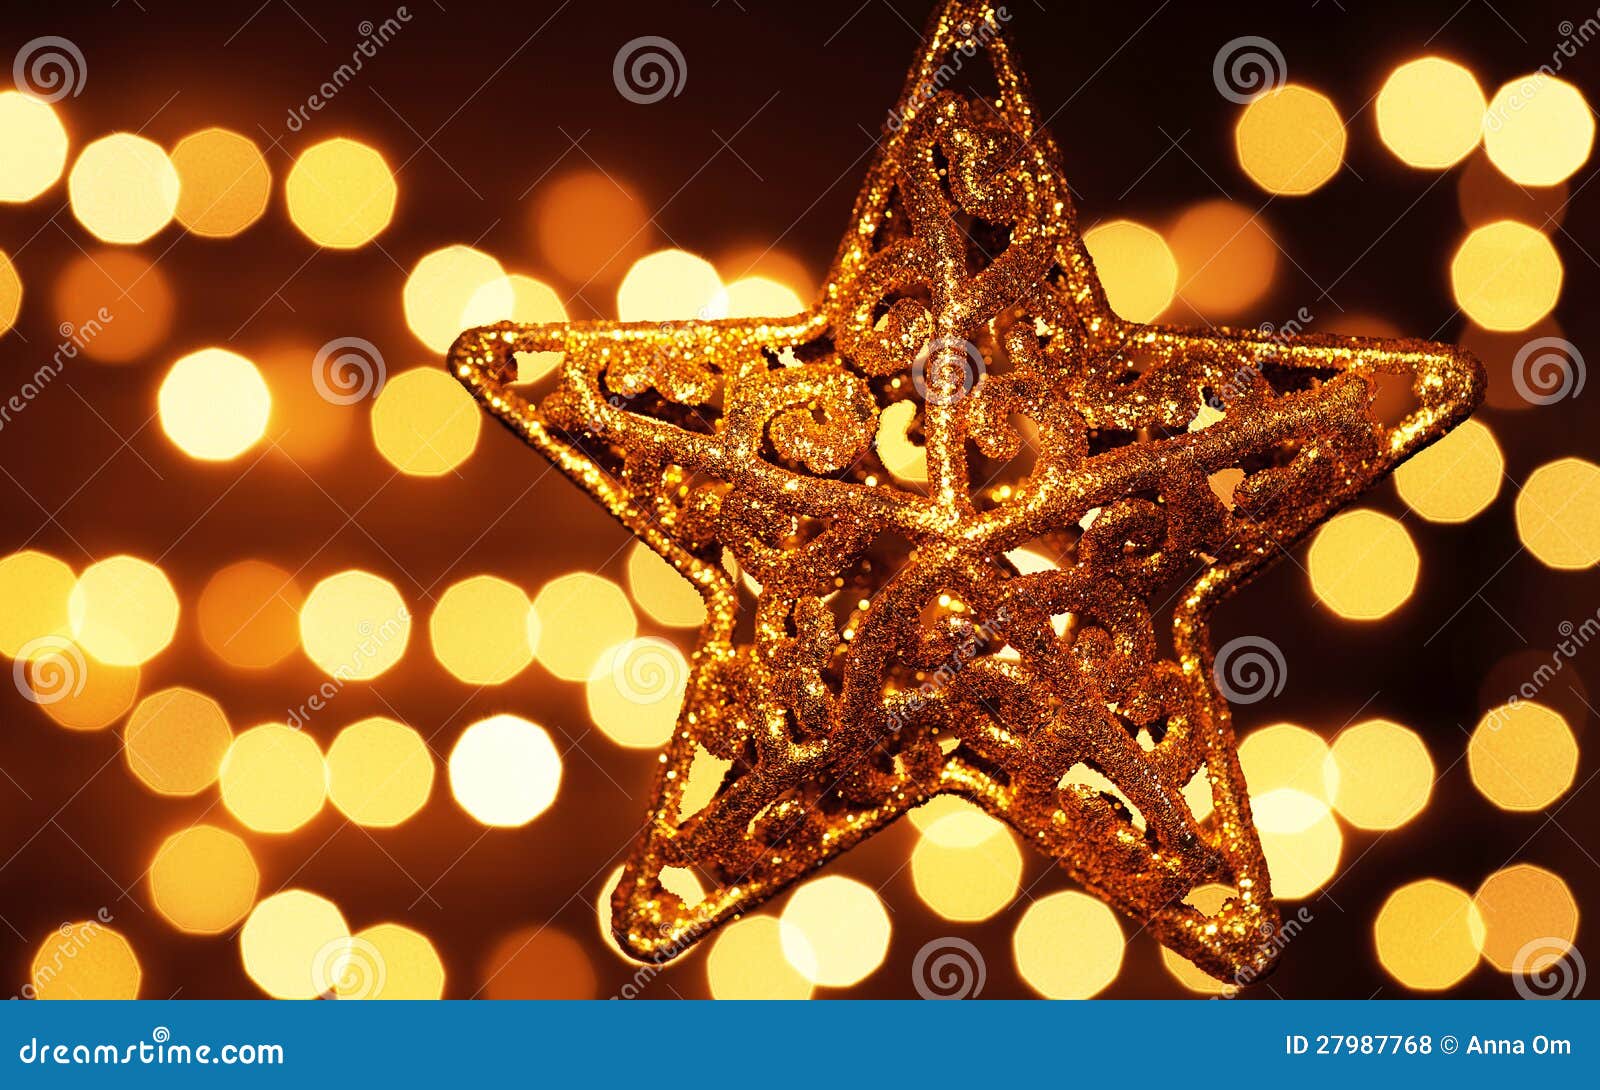 Star decoration stock photo. Image of object, holiday - 27987768